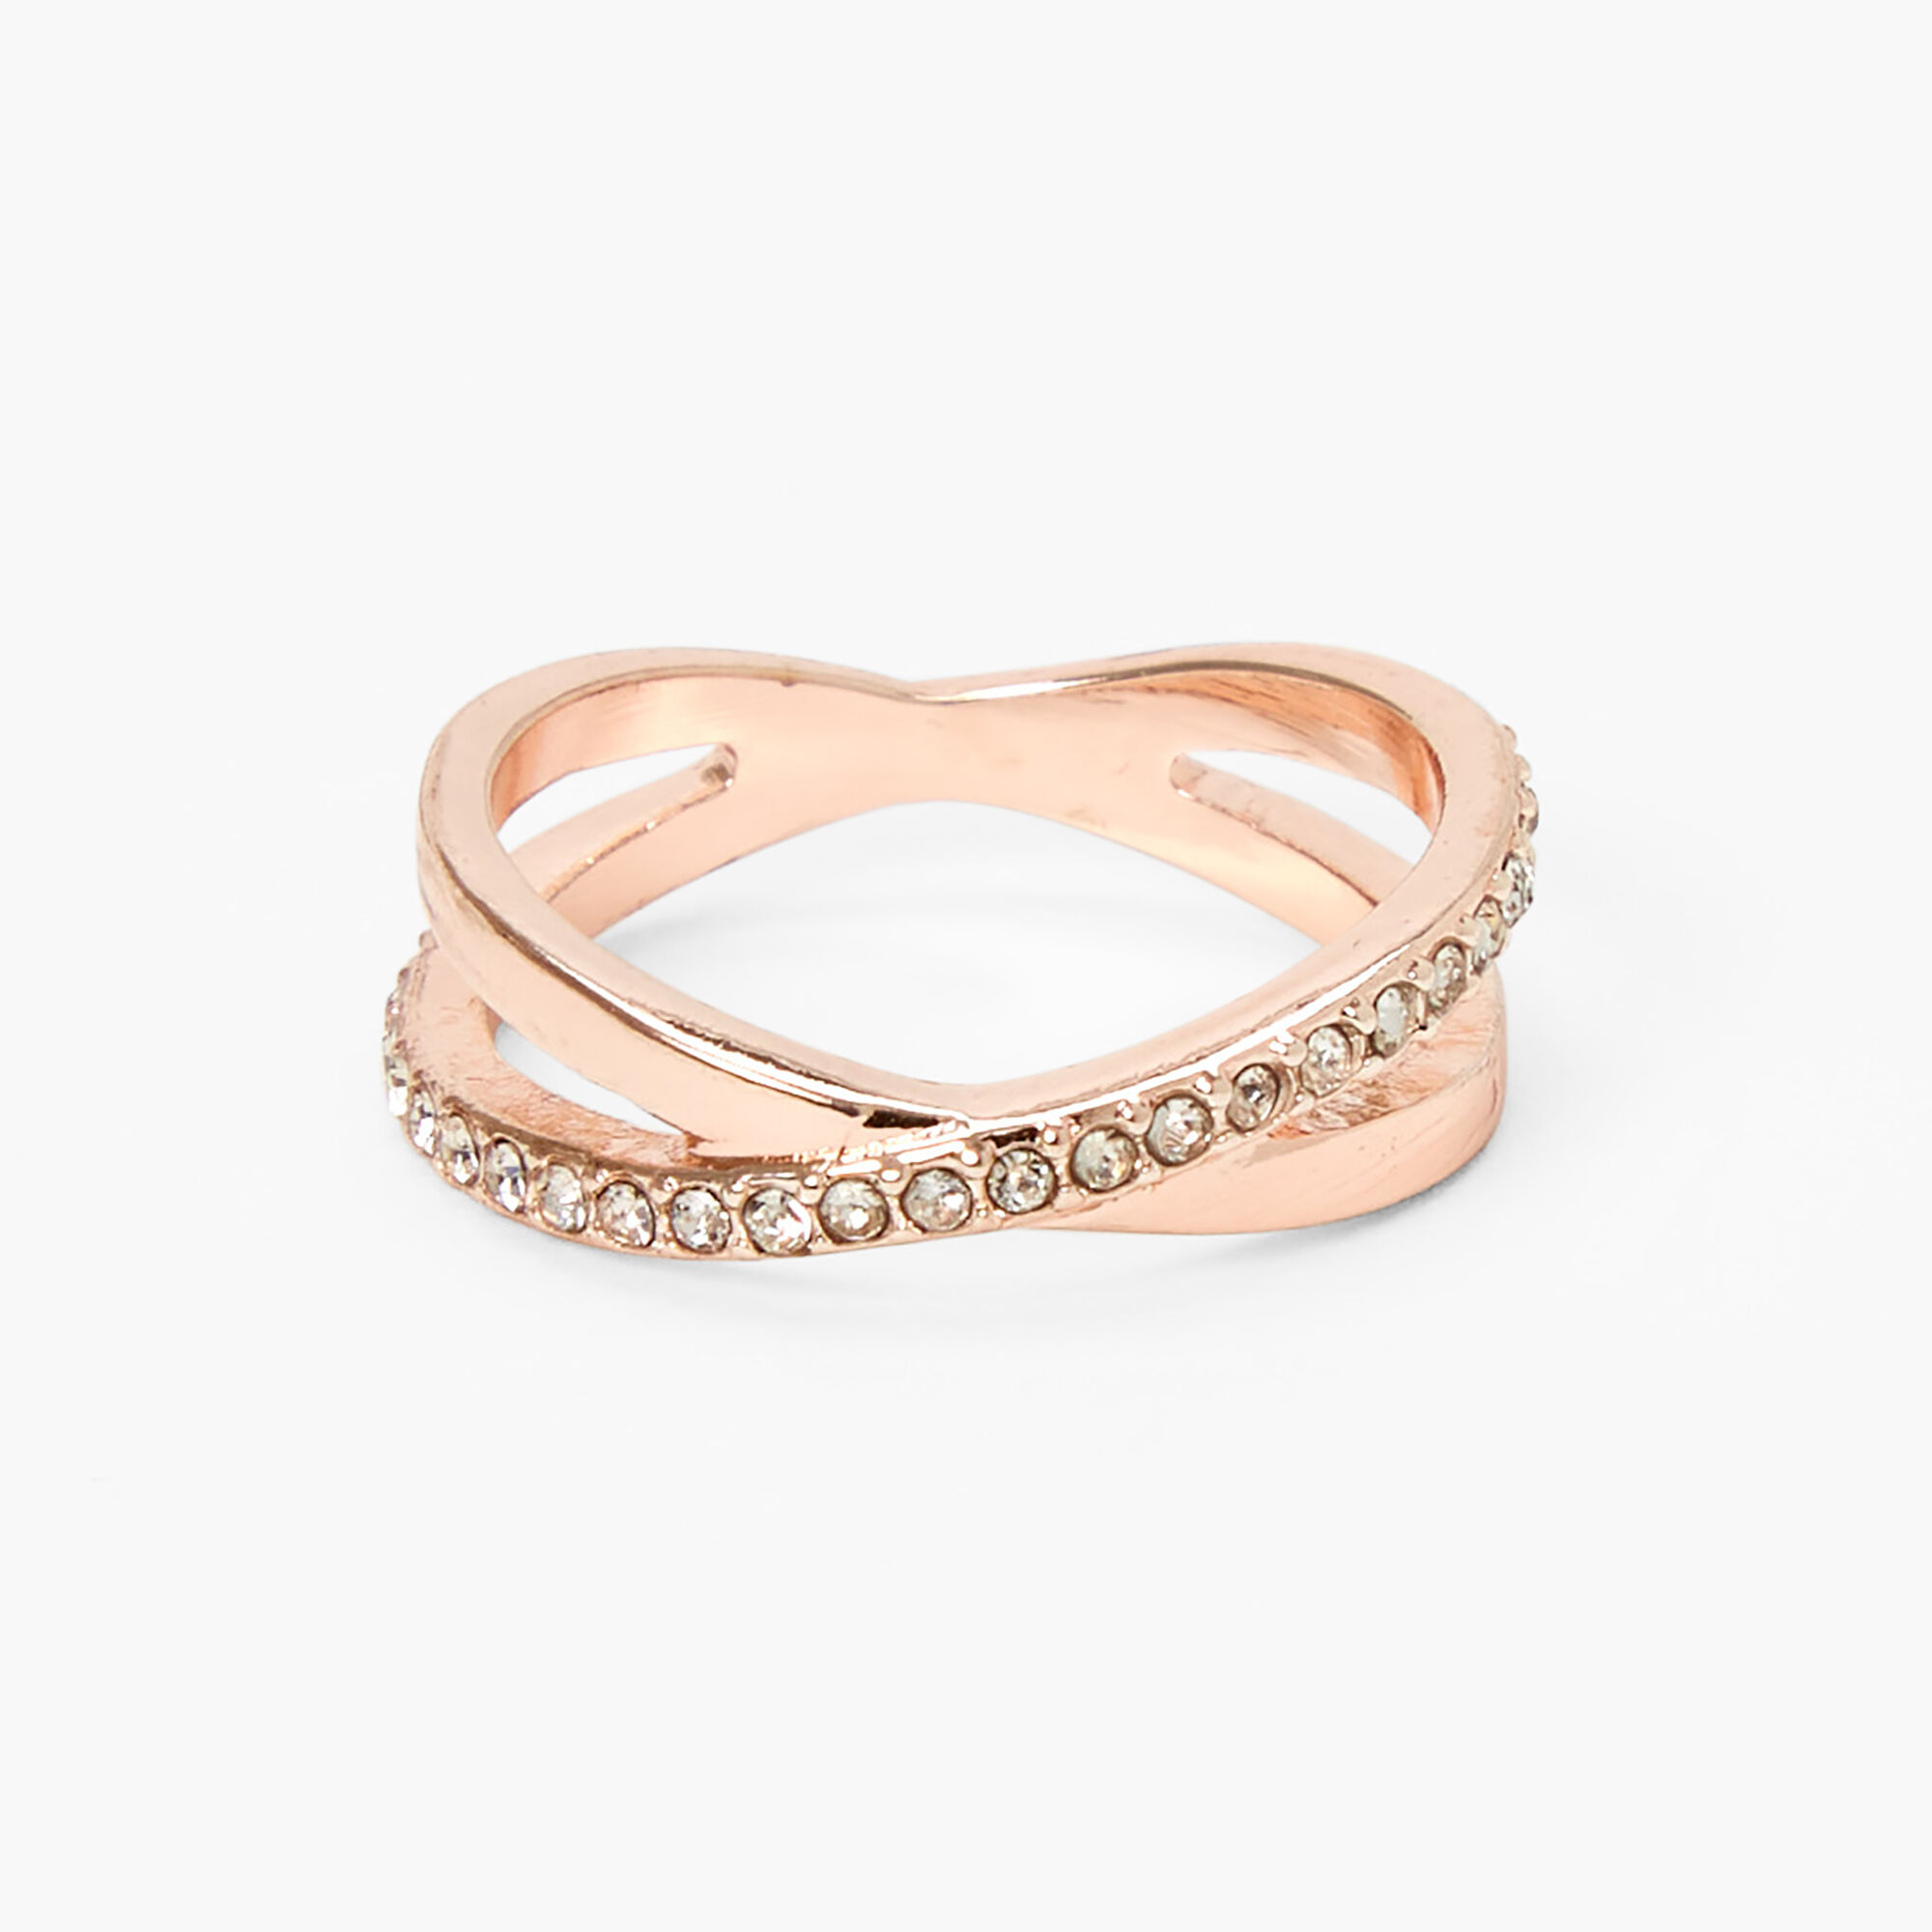 View Claires Rose Embellished Criss Cross Ring Gold information